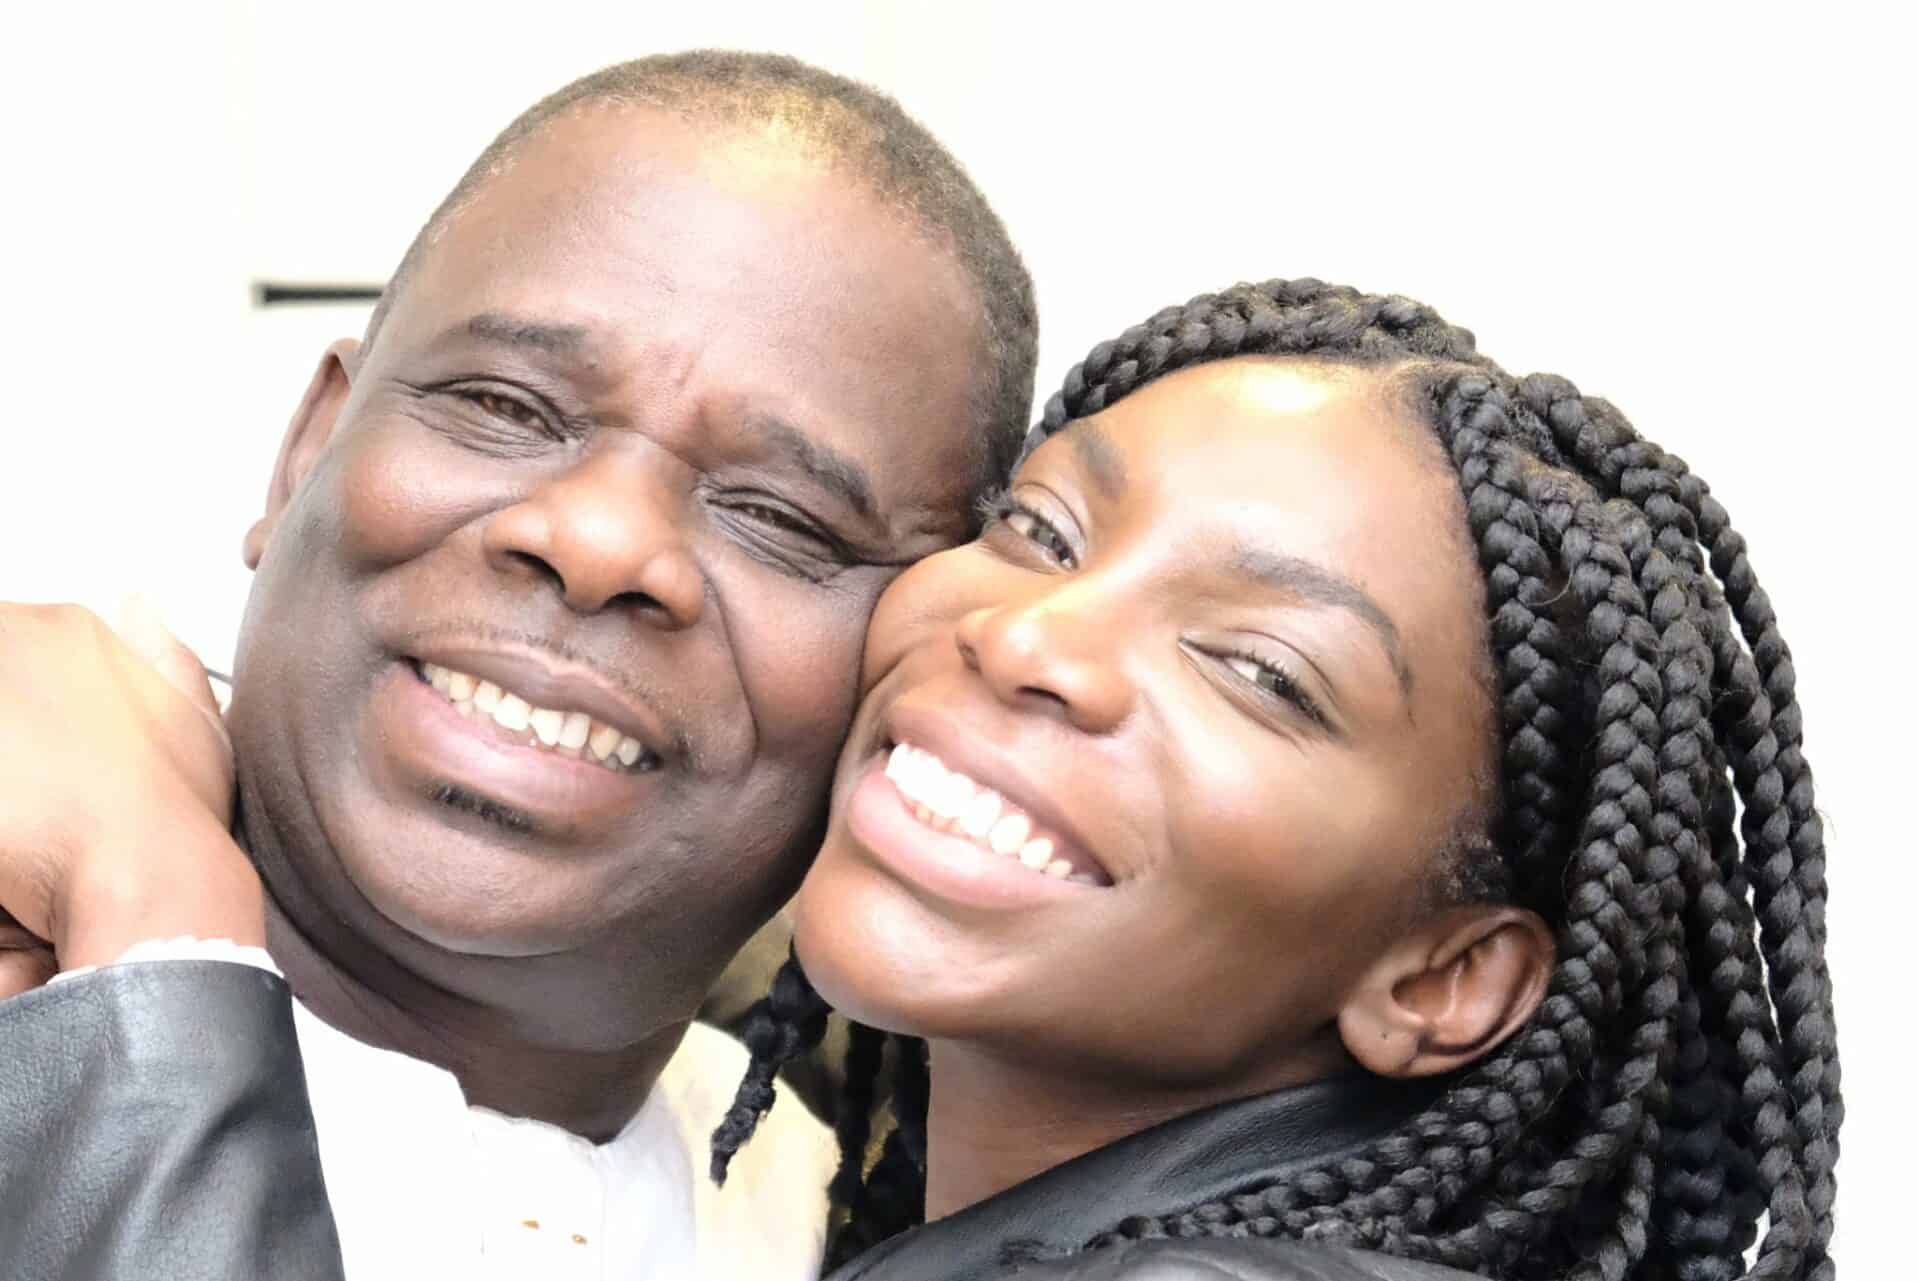 Michaela Coel's father and her